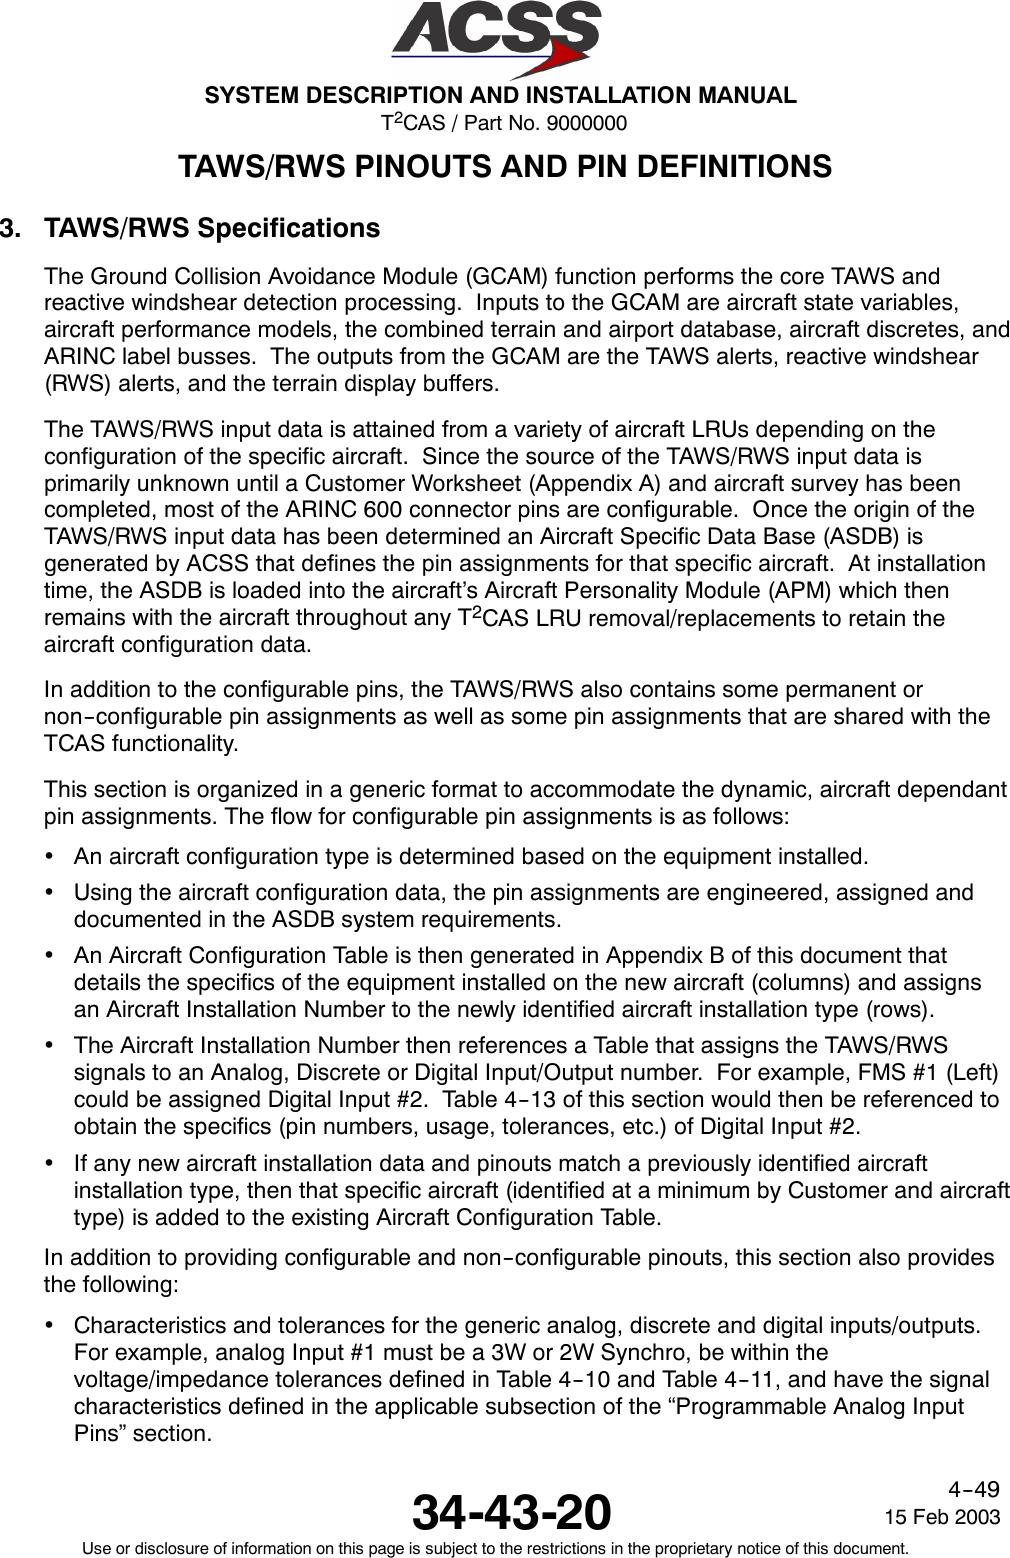 T2CAS / Part No. 9000000SYSTEM DESCRIPTION AND INSTALLATION MANUAL34-43-20 15 Feb 2003Use or disclosure of information on this page is subject to the restrictions in the proprietary notice of this document.4--49TAWS/RWS PINOUTS AND PIN DEFINITIONS3. TAWS/RWS SpecificationsThe Ground Collision Avoidance Module (GCAM) function performs the core TAWS andreactive windshear detection processing. Inputs to the GCAM are aircraft state variables,aircraft performance models, the combined terrain and airport database, aircraft discretes, andARINC label busses. The outputs from the GCAM are the TAWS alerts, reactive windshear(RWS) alerts, and the terrain display buffers.The TAWS/RWS input data is attained from a variety of aircraft LRUs depending on theconfiguration of the specific aircraft. Since the source of the TAWS/RWS input data isprimarily unknown until a Customer Worksheet (Appendix A) and aircraft survey has beencompleted, most of the ARINC 600 connector pins are configurable. Once the origin of theTAWS/RWS input data has been determined an Aircraft Specific Data Base (ASDB) isgenerated by ACSS that defines the pin assignments for that specific aircraft. At installationtime, the ASDB is loaded into the aircraft’s Aircraft Personality Module (APM) which thenremains with the aircraft throughout any T2CAS LRU removal/replacements to retain theaircraft configuration data.In addition to the configurable pins, the TAWS/RWS also contains some permanent ornon--configurable pin assignments as well as some pin assignments that are shared with theTCAS functionality.This section is organized in a generic format to accommodate the dynamic, aircraft dependantpin assignments. The flow for configurable pin assignments is as follows:•An aircraft configuration type is determined based on the equipment installed.•Using the aircraft configuration data, the pin assignments are engineered, assigned anddocumented in the ASDB system requirements.•An Aircraft Configuration Table is then generated in Appendix B of this document thatdetails the specifics of the equipment installed on the new aircraft (columns) and assignsan Aircraft Installation Number to the newly identified aircraft installation type (rows).•The Aircraft Installation Number then references a Table that assigns the TAWS/RWSsignals to an Analog, Discrete or Digital Input/Output number. For example, FMS #1 (Left)could be assigned Digital Input #2. Table 4--13 of this section would then be referenced toobtain the specifics (pin numbers, usage, tolerances, etc.) of Digital Input #2.•If any new aircraft installation data and pinouts match a previously identified aircraftinstallation type, then that specific aircraft (identified at a minimum by Customer and aircrafttype) is added to the existing Aircraft Configuration Table.In addition to providing configurable and non--configurable pinouts, this section also providesthe following:•Characteristics and tolerances for the generic analog, discrete and digital inputs/outputs.For example, analog Input #1 must be a 3W or 2W Synchro, be within thevoltage/impedance tolerances defined in Table 4--10 and Table 4--11, and have the signalcharacteristics defined in the applicable subsection of the “Programmable Analog InputPins” section.